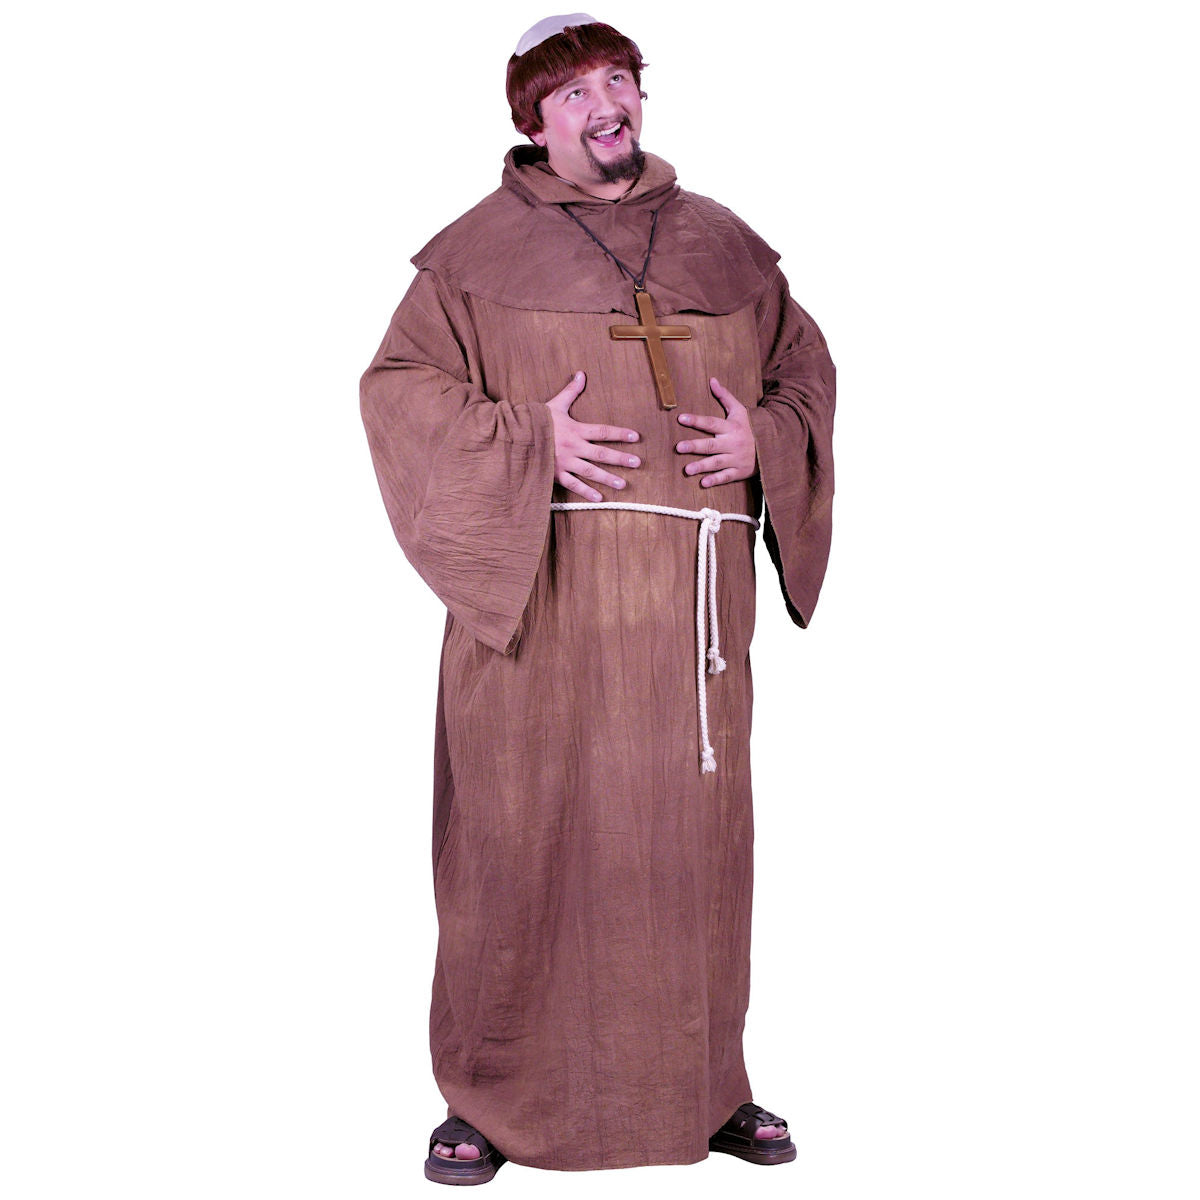 Plus Size Medieval Monk Priest Men's Costume with Wig